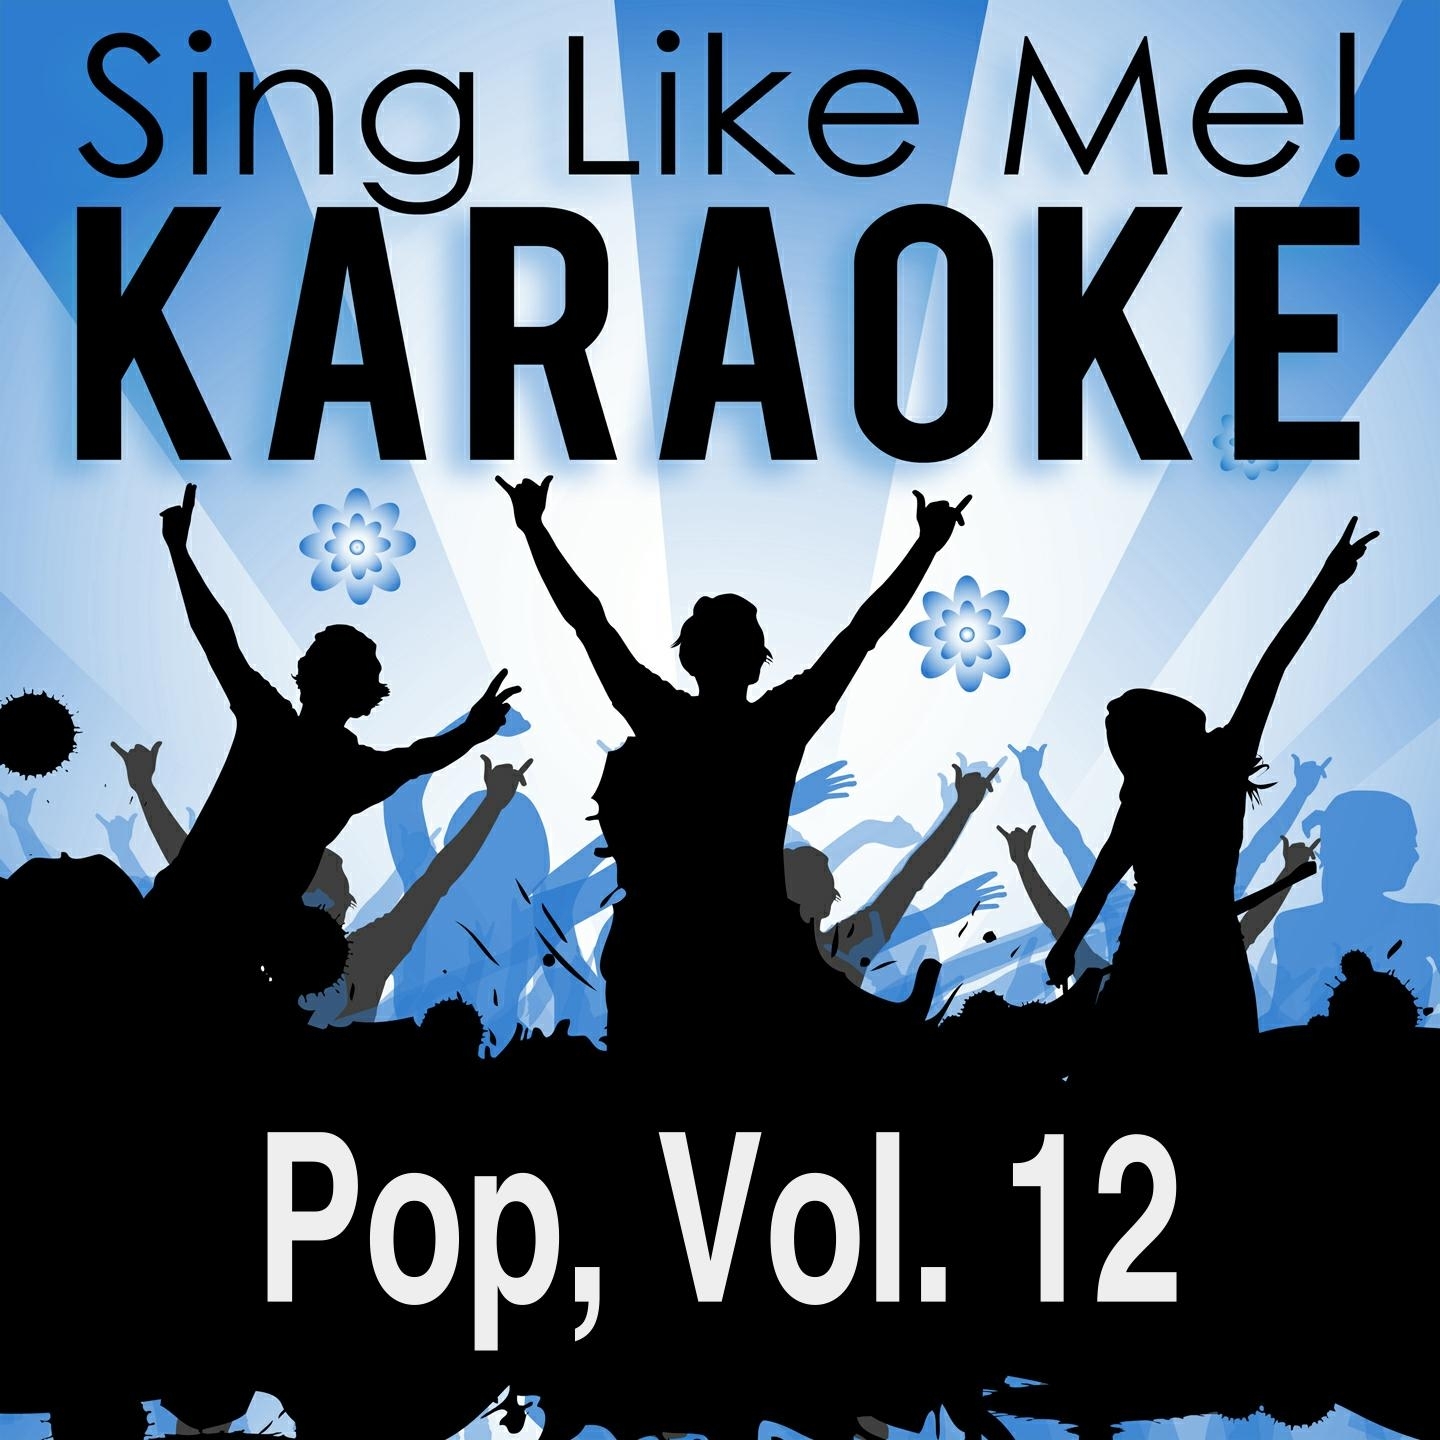 My One True Friend (Karaoke Version With Guide Melody) (Originally Performed By Bette Midler)